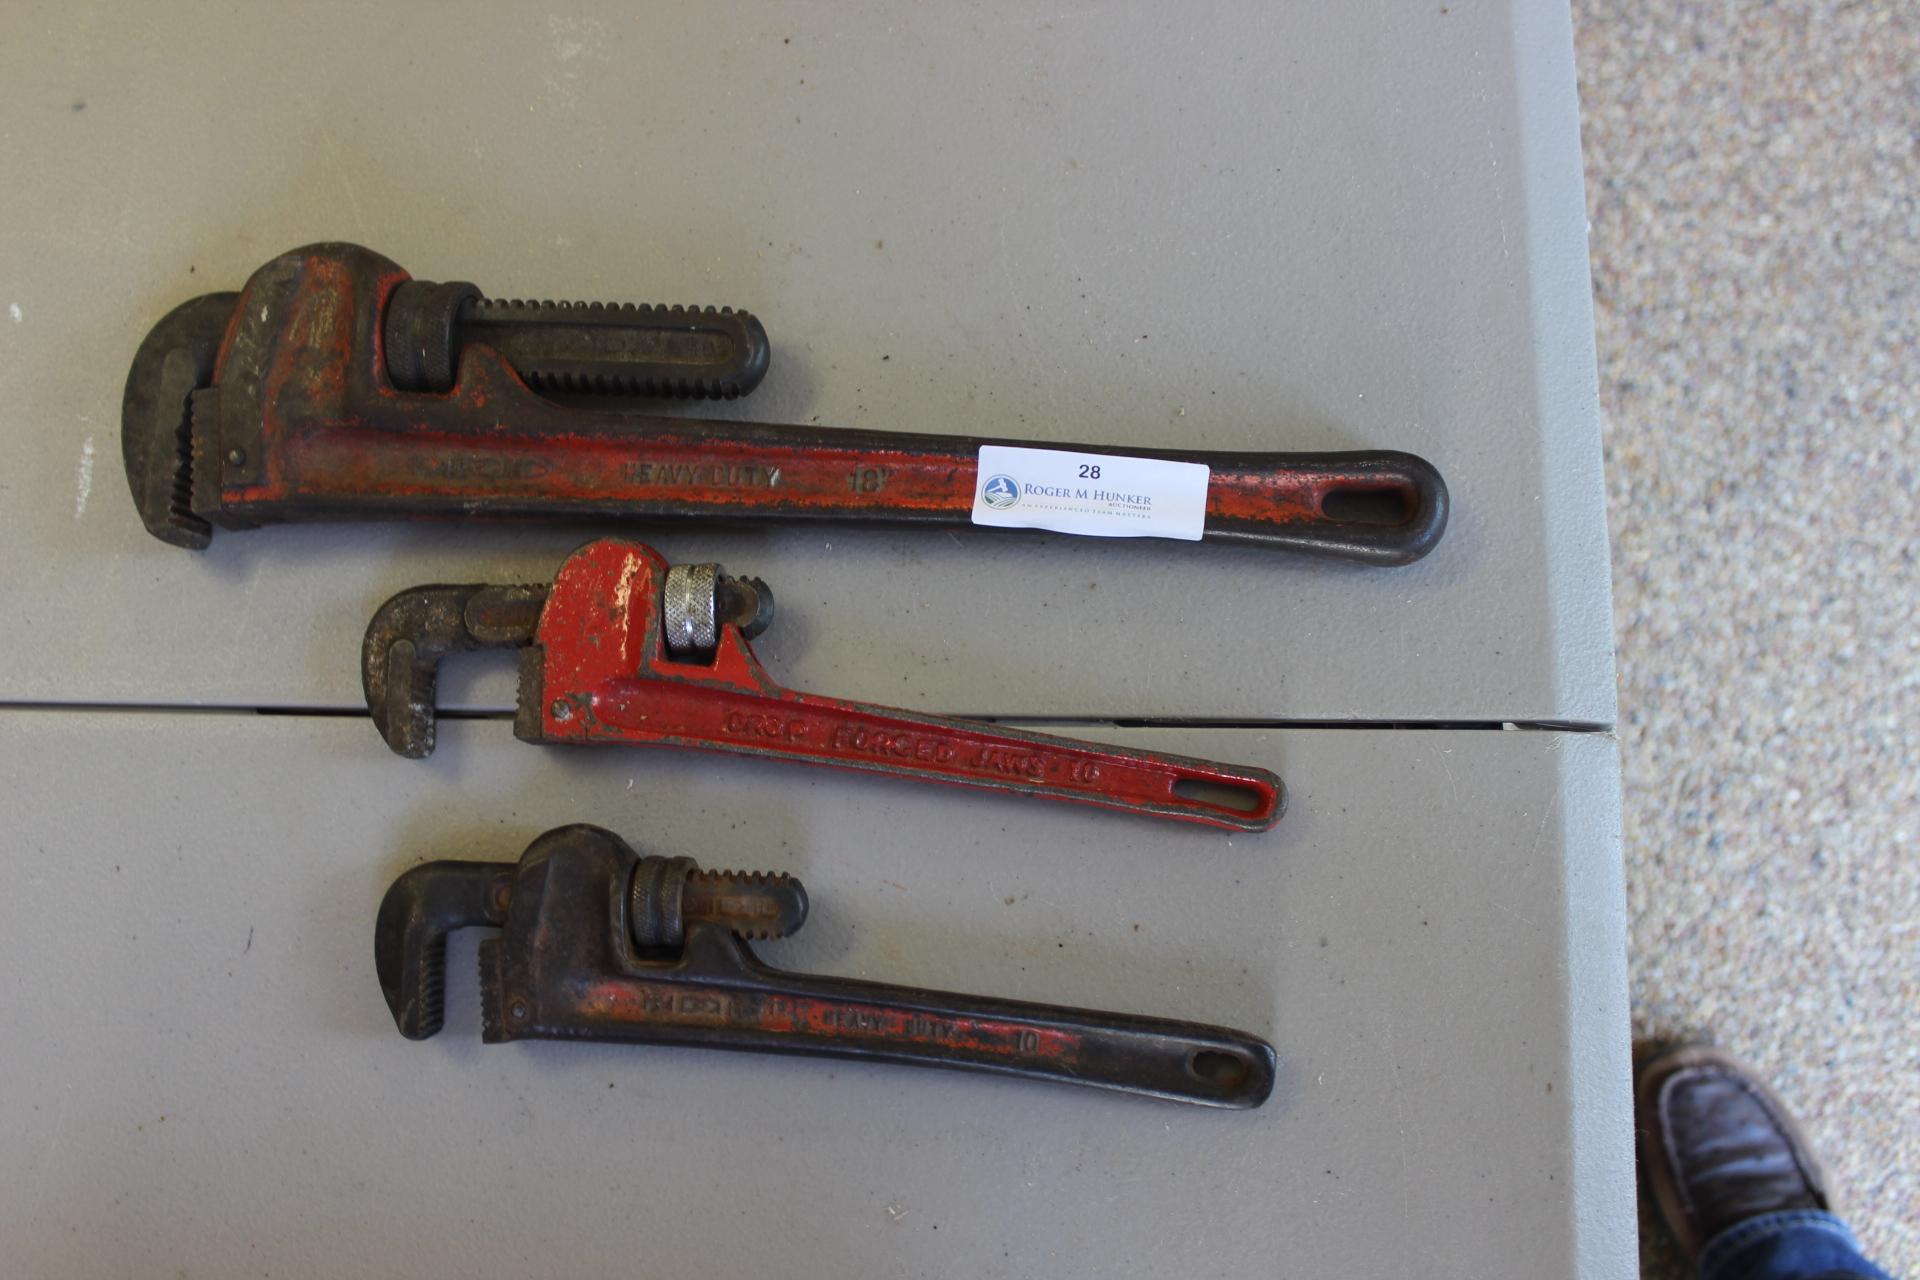 Pipe Wrenches-2 10" and an 18"